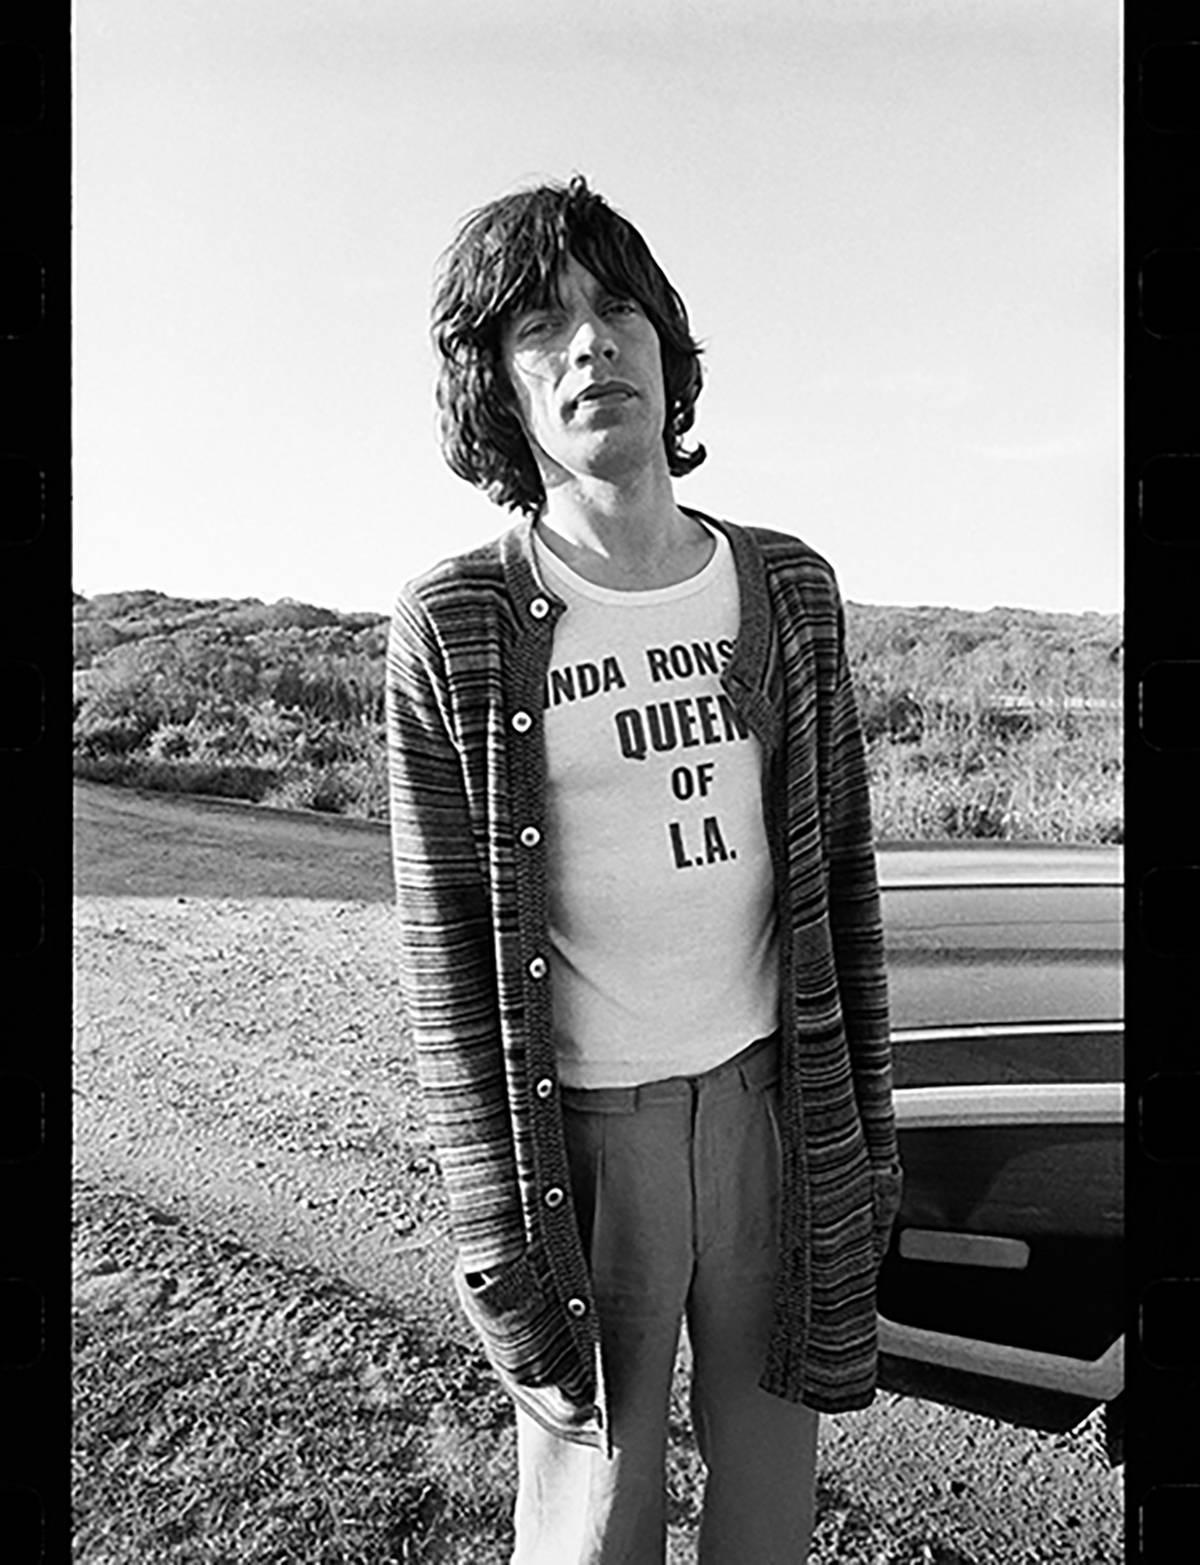 Black and White Photograph Christopher Makos - Mick Jagger (Queen of LA)